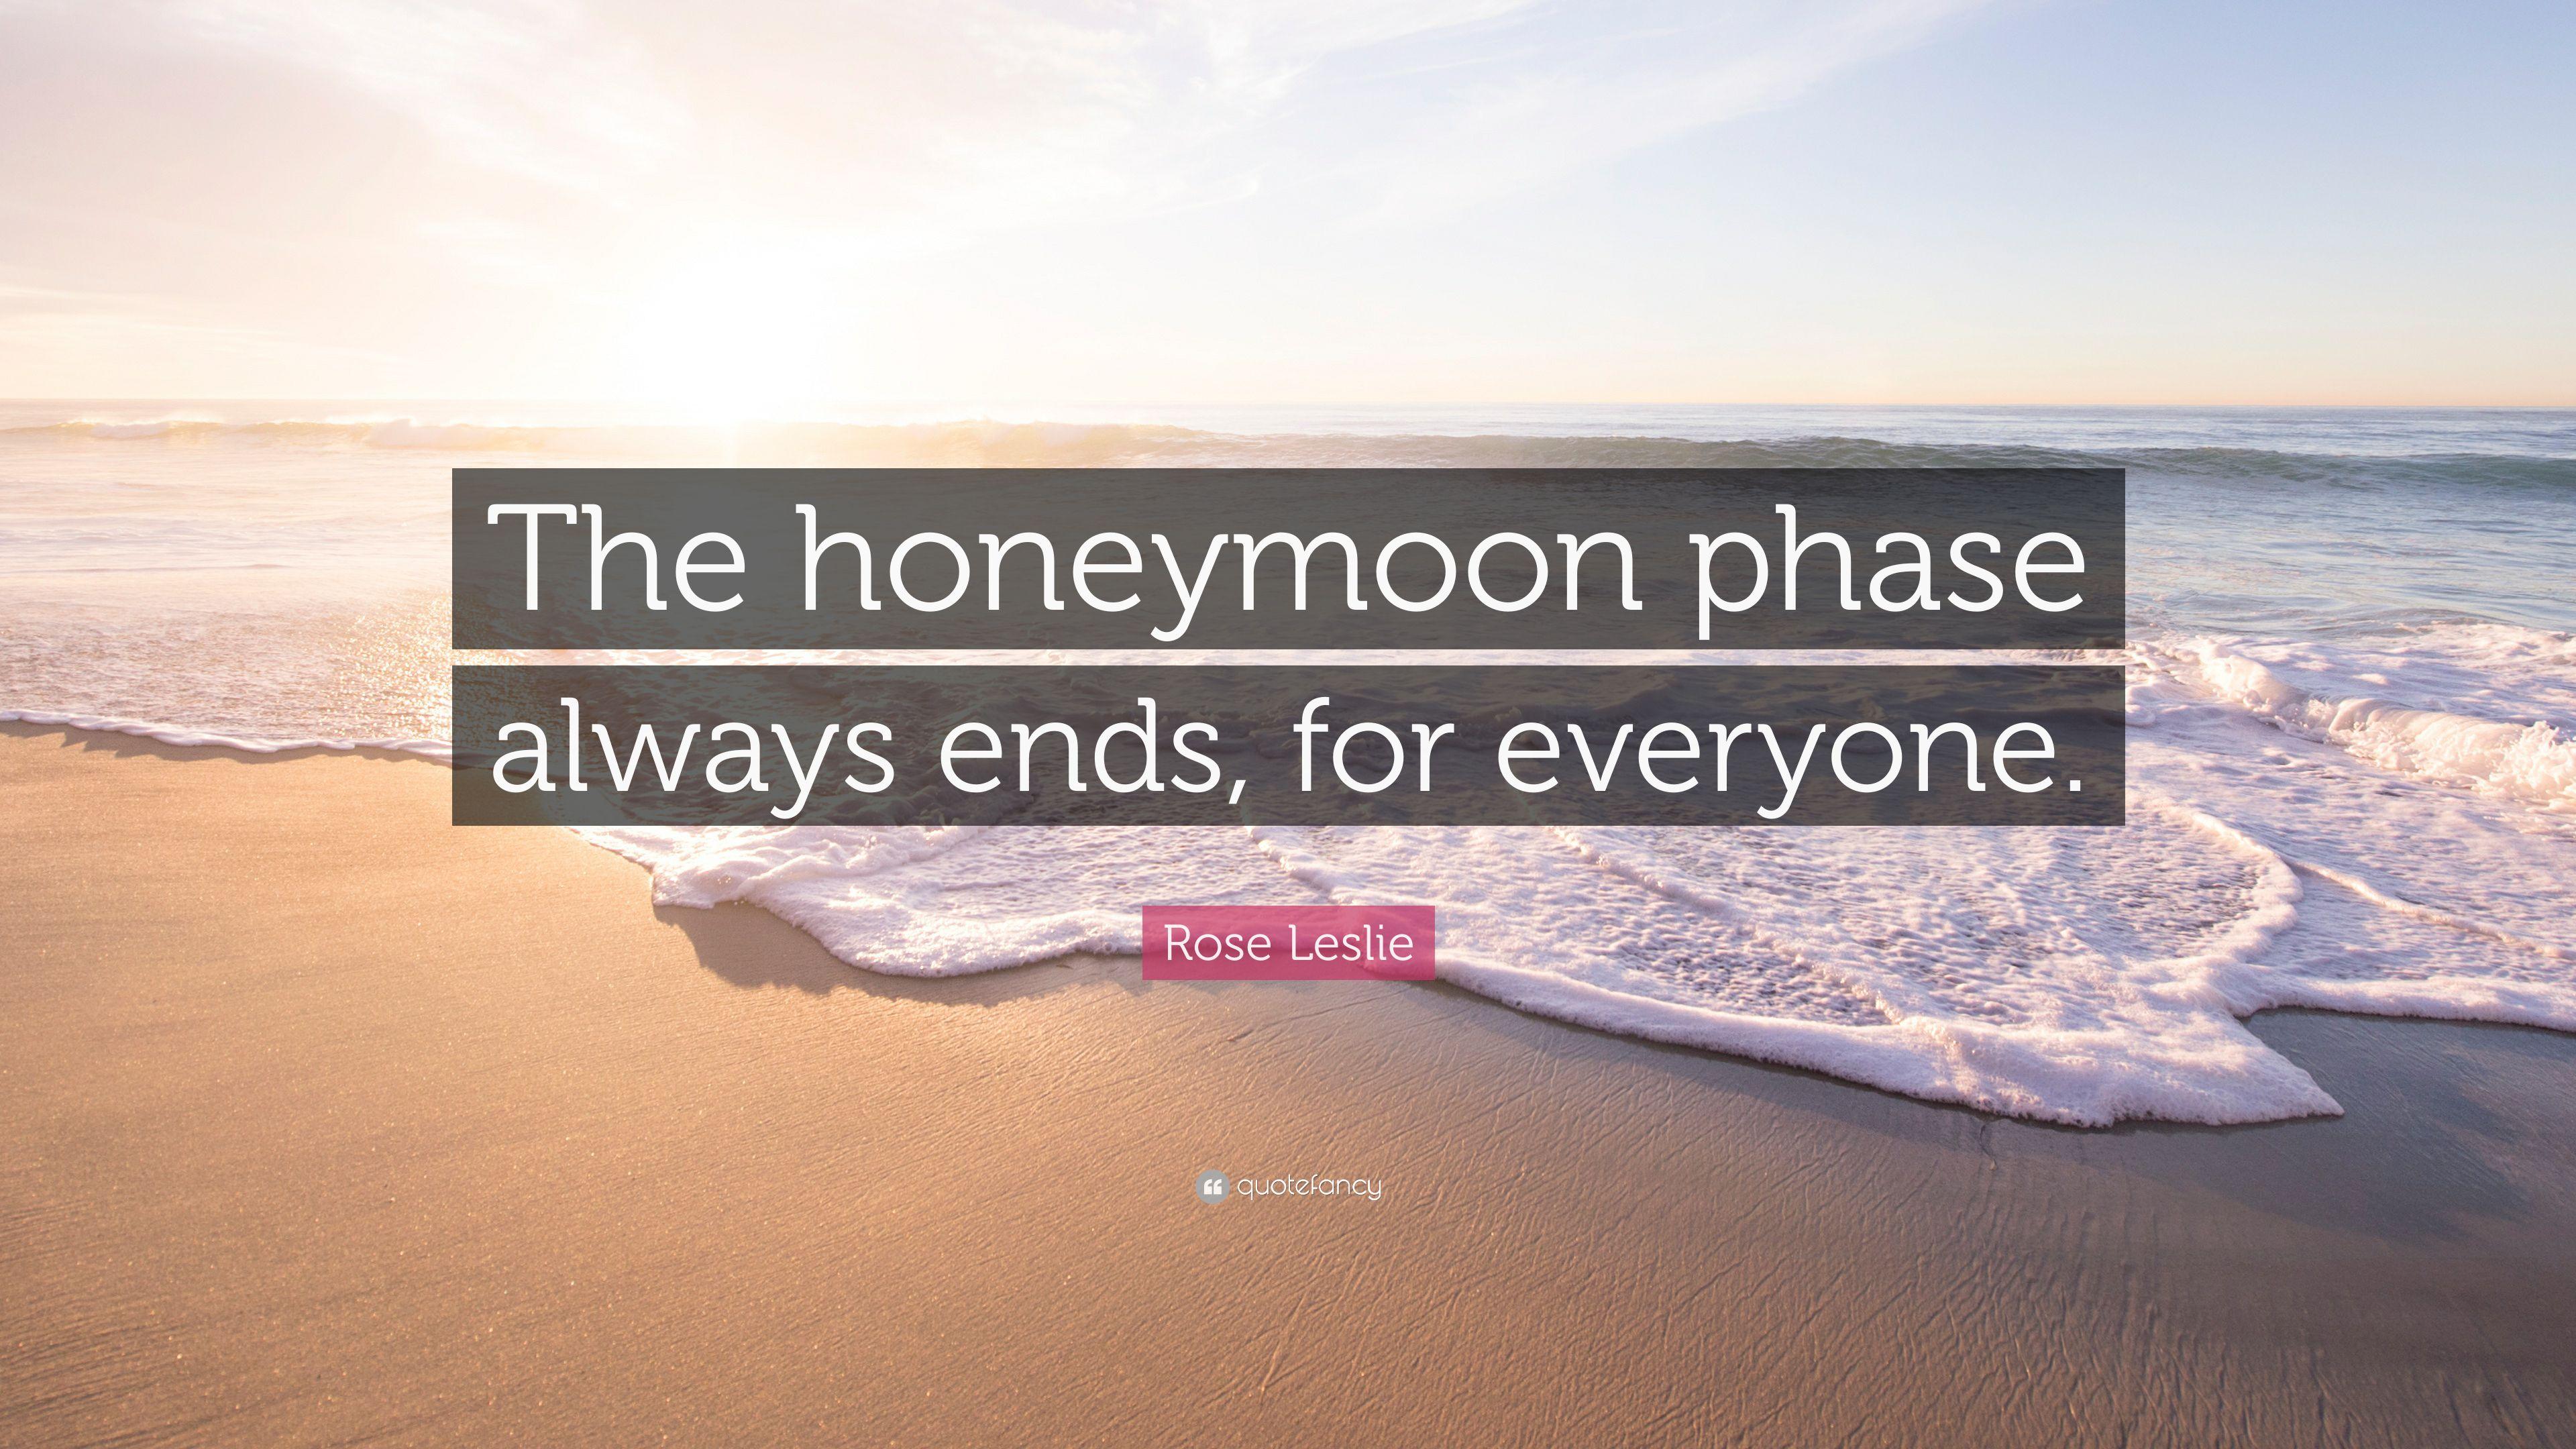 Rose Leslie Quote: “The honeymoon phase always ends, for everyone